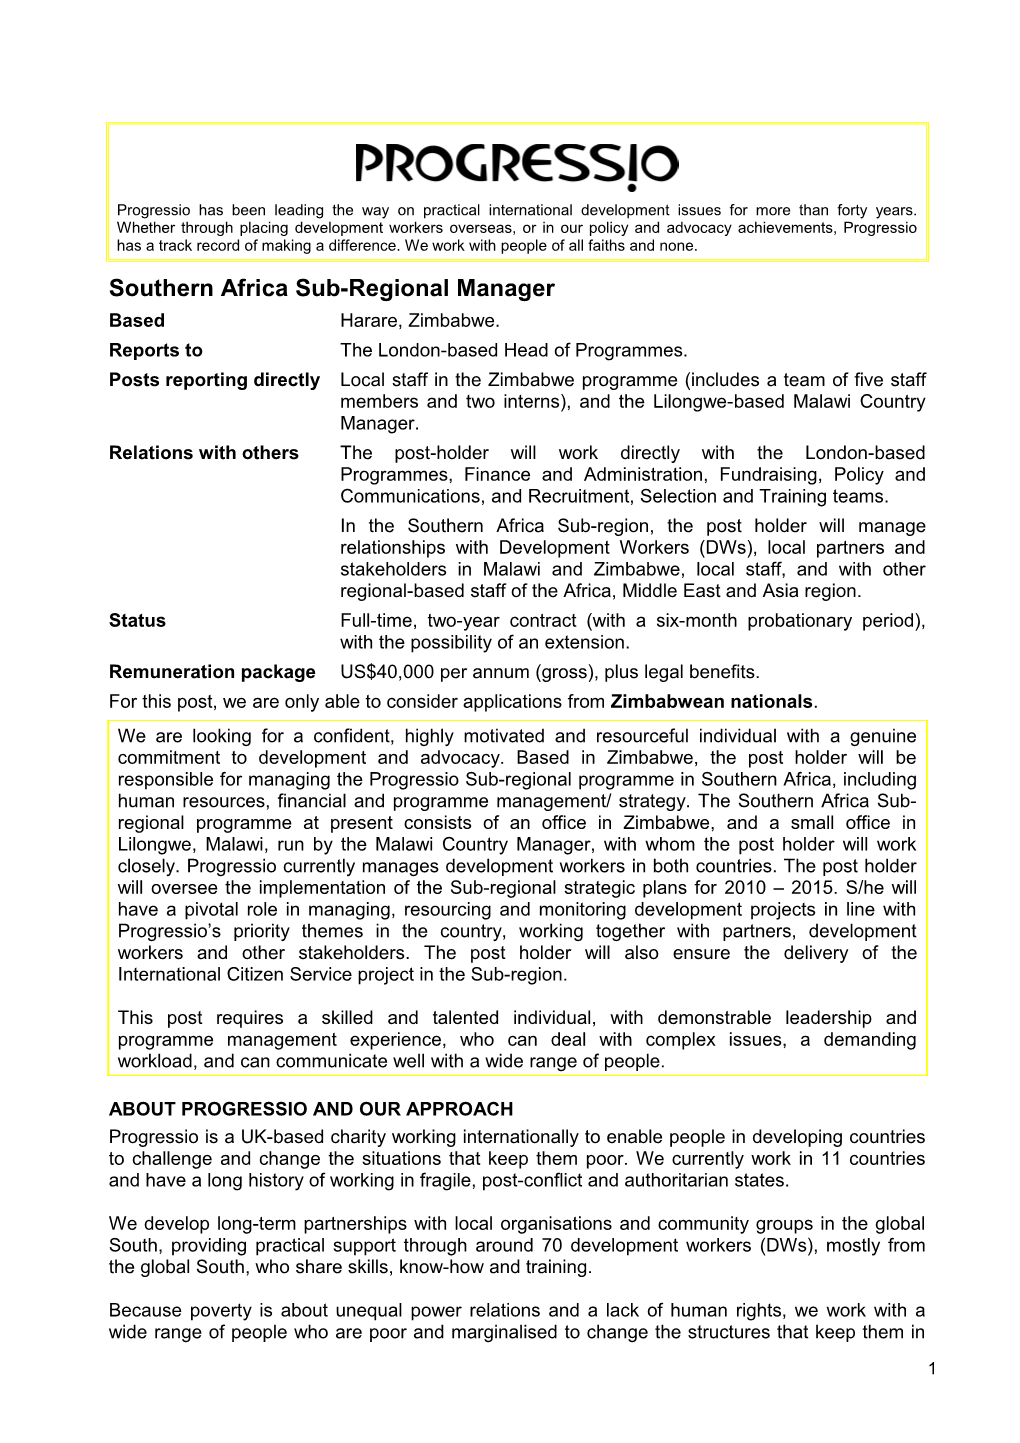 Southern Africa Sub-Regional Manager